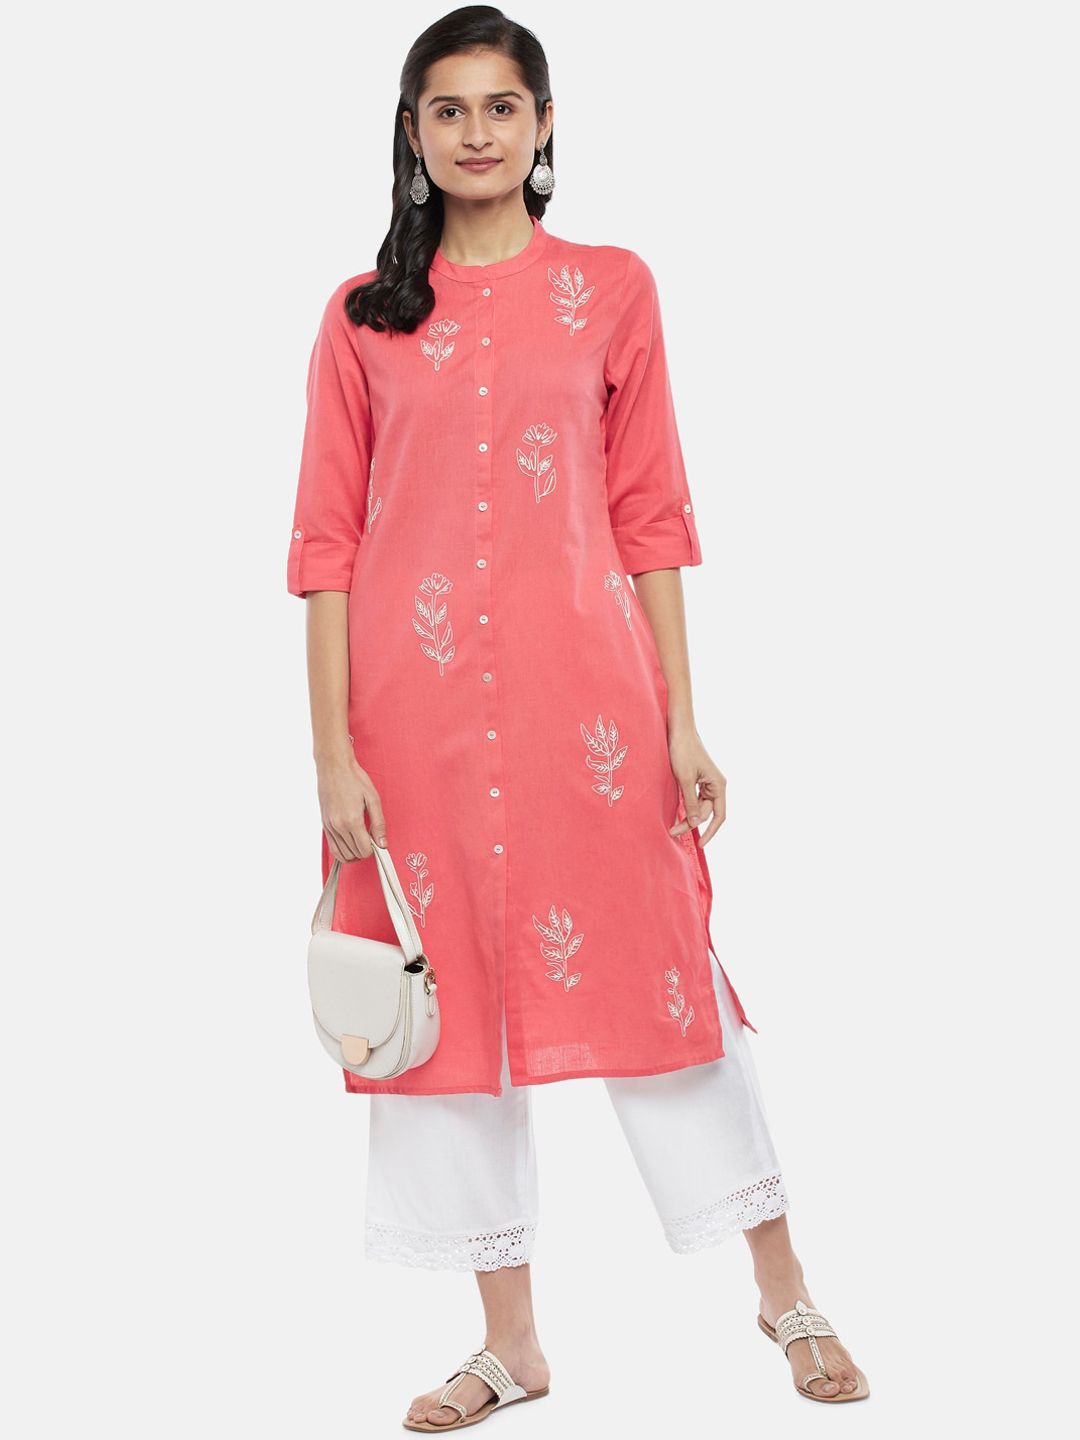 RANGMANCH BY PANTALOONS Women Coral Floral Embroidered Kurta Price in India